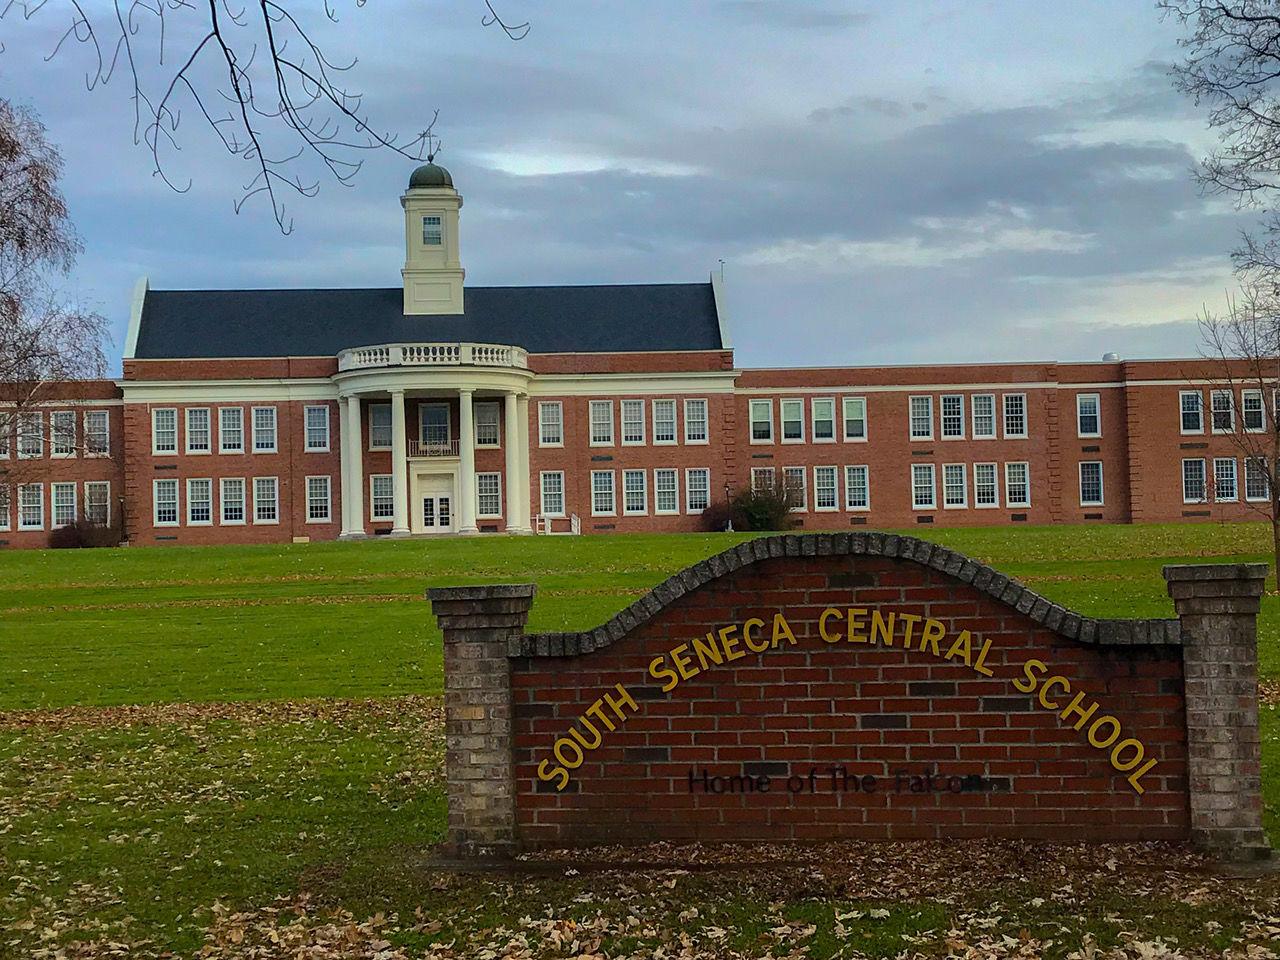 Administrator who resigned from RCSD in 2021 emerges as promising leader for South Seneca Elementary School